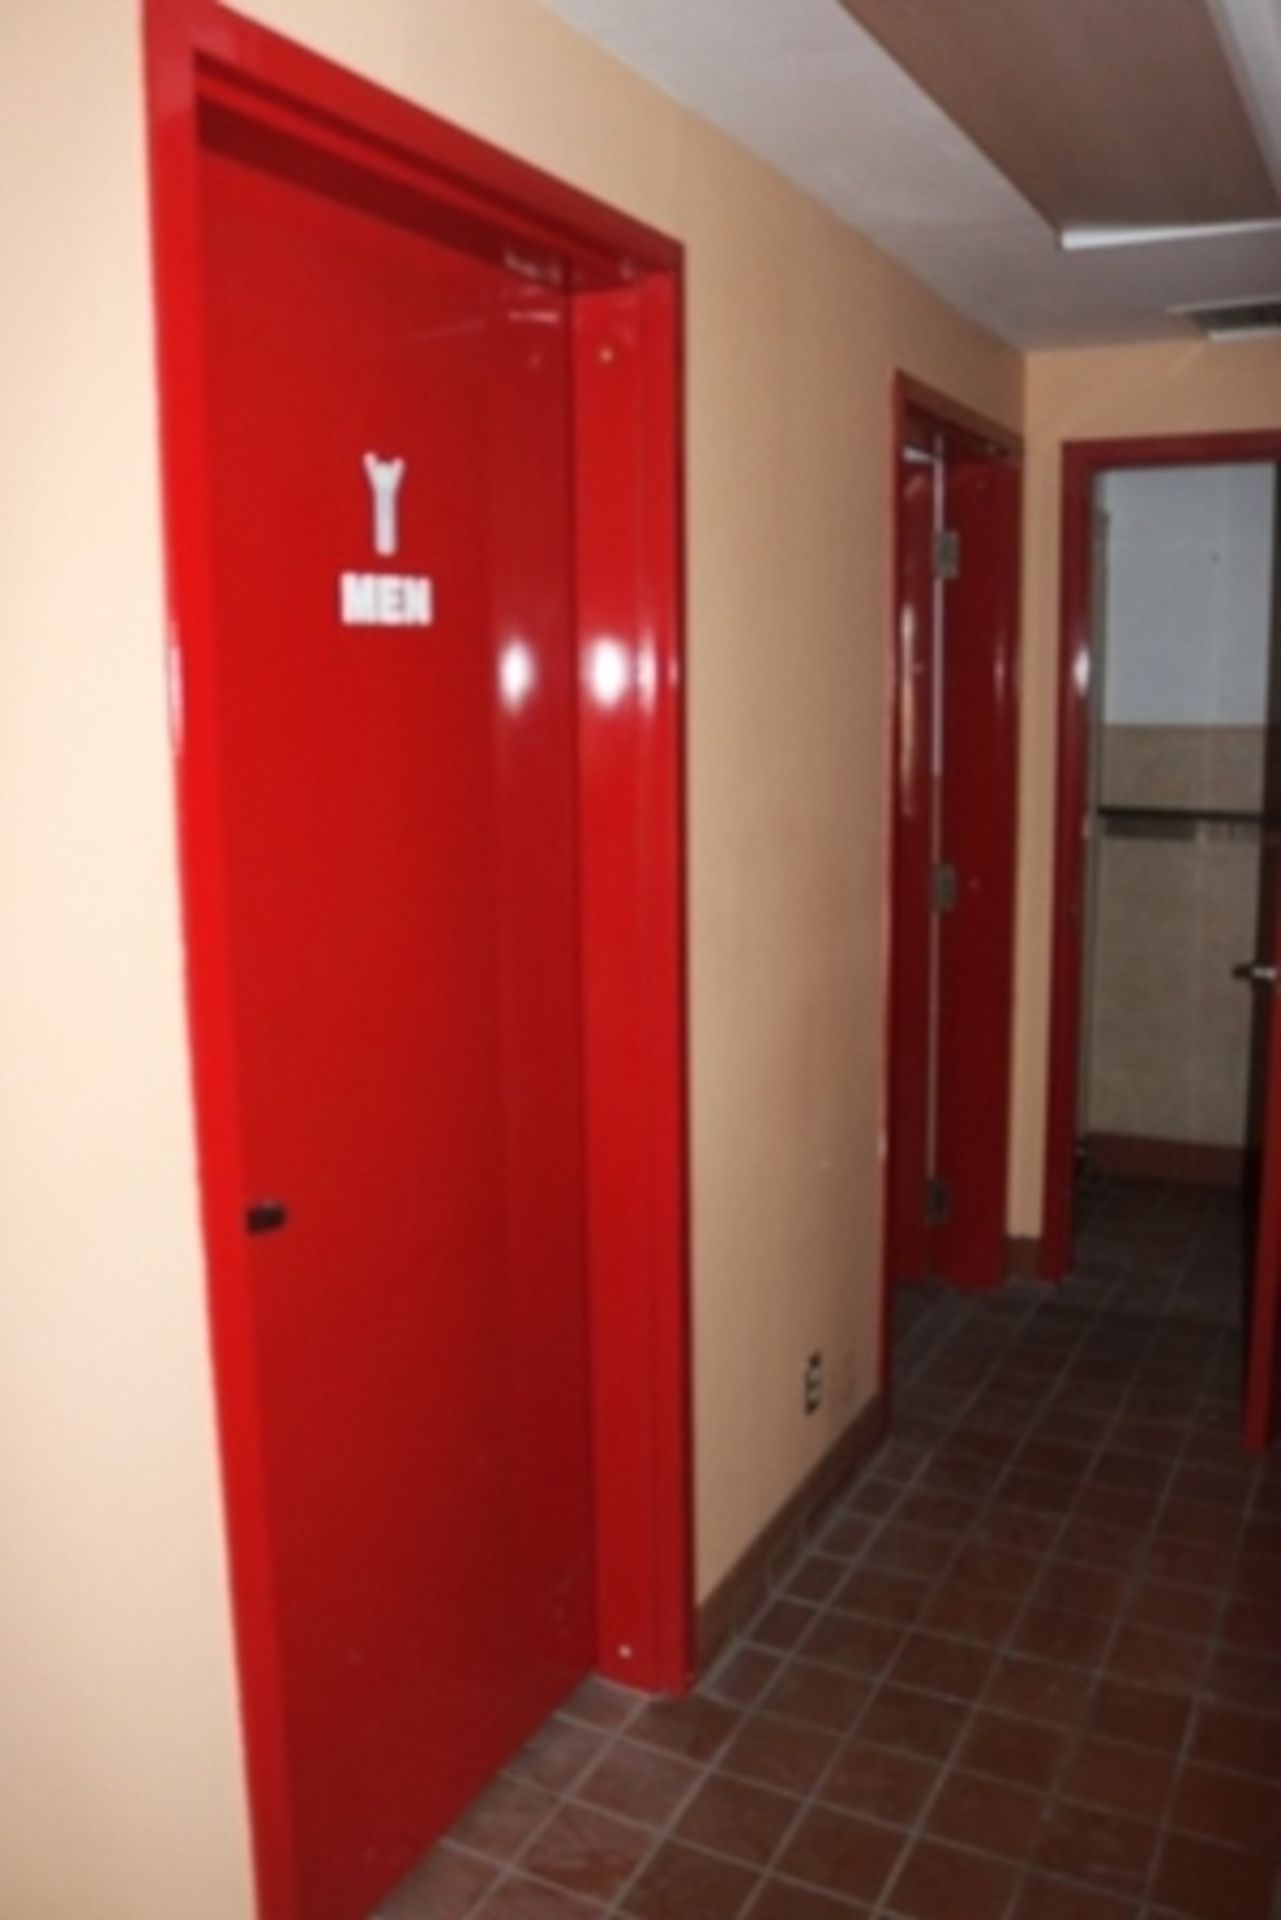 Mens and womens restrooms with 3 red steel doors (639)